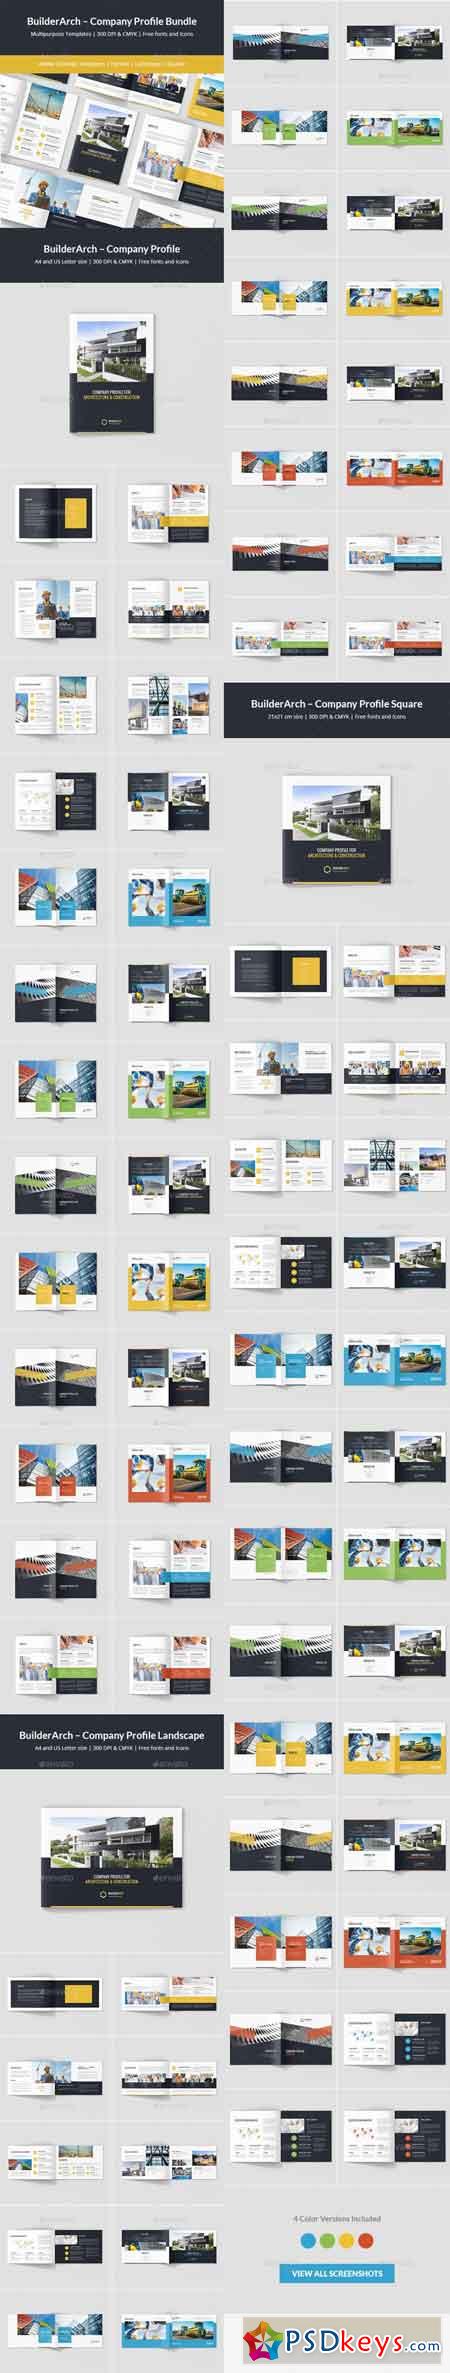 Builderarch Construction Company Profile Bundle 3 In 1 22054772 Free Download Photoshop Vector Stock Image Via Torrent Zippyshare From Psdkeys Com